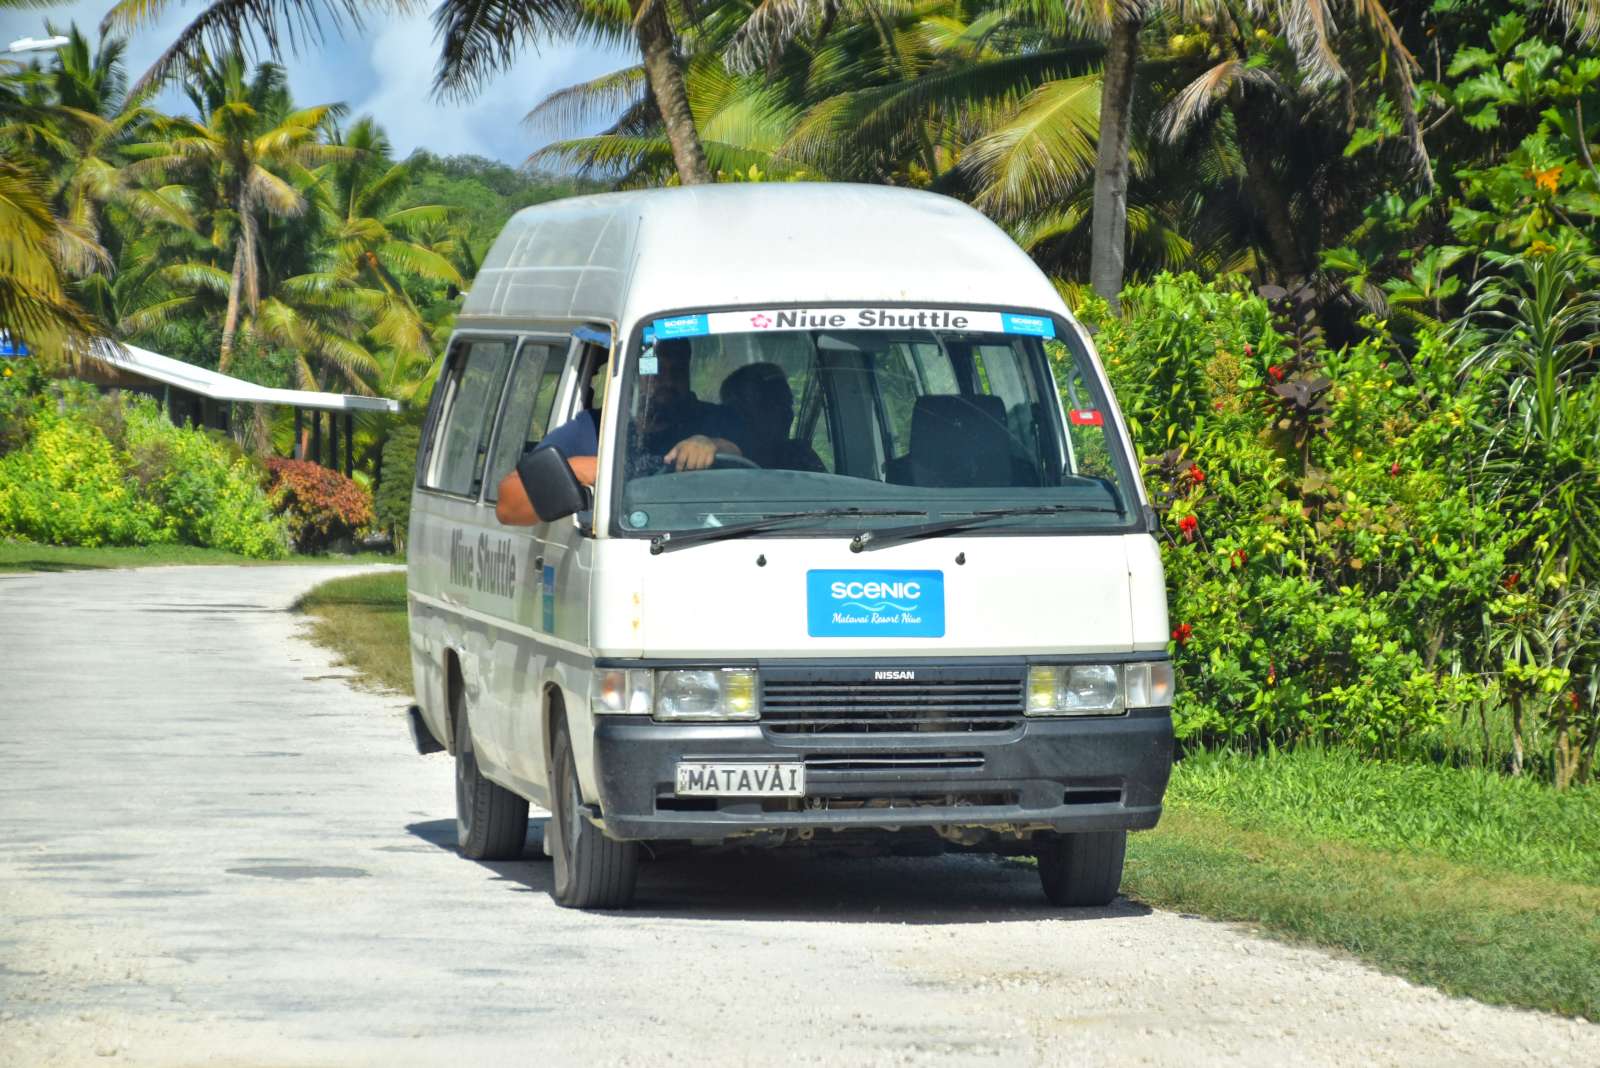 What is the Cost of Transport in Niue?